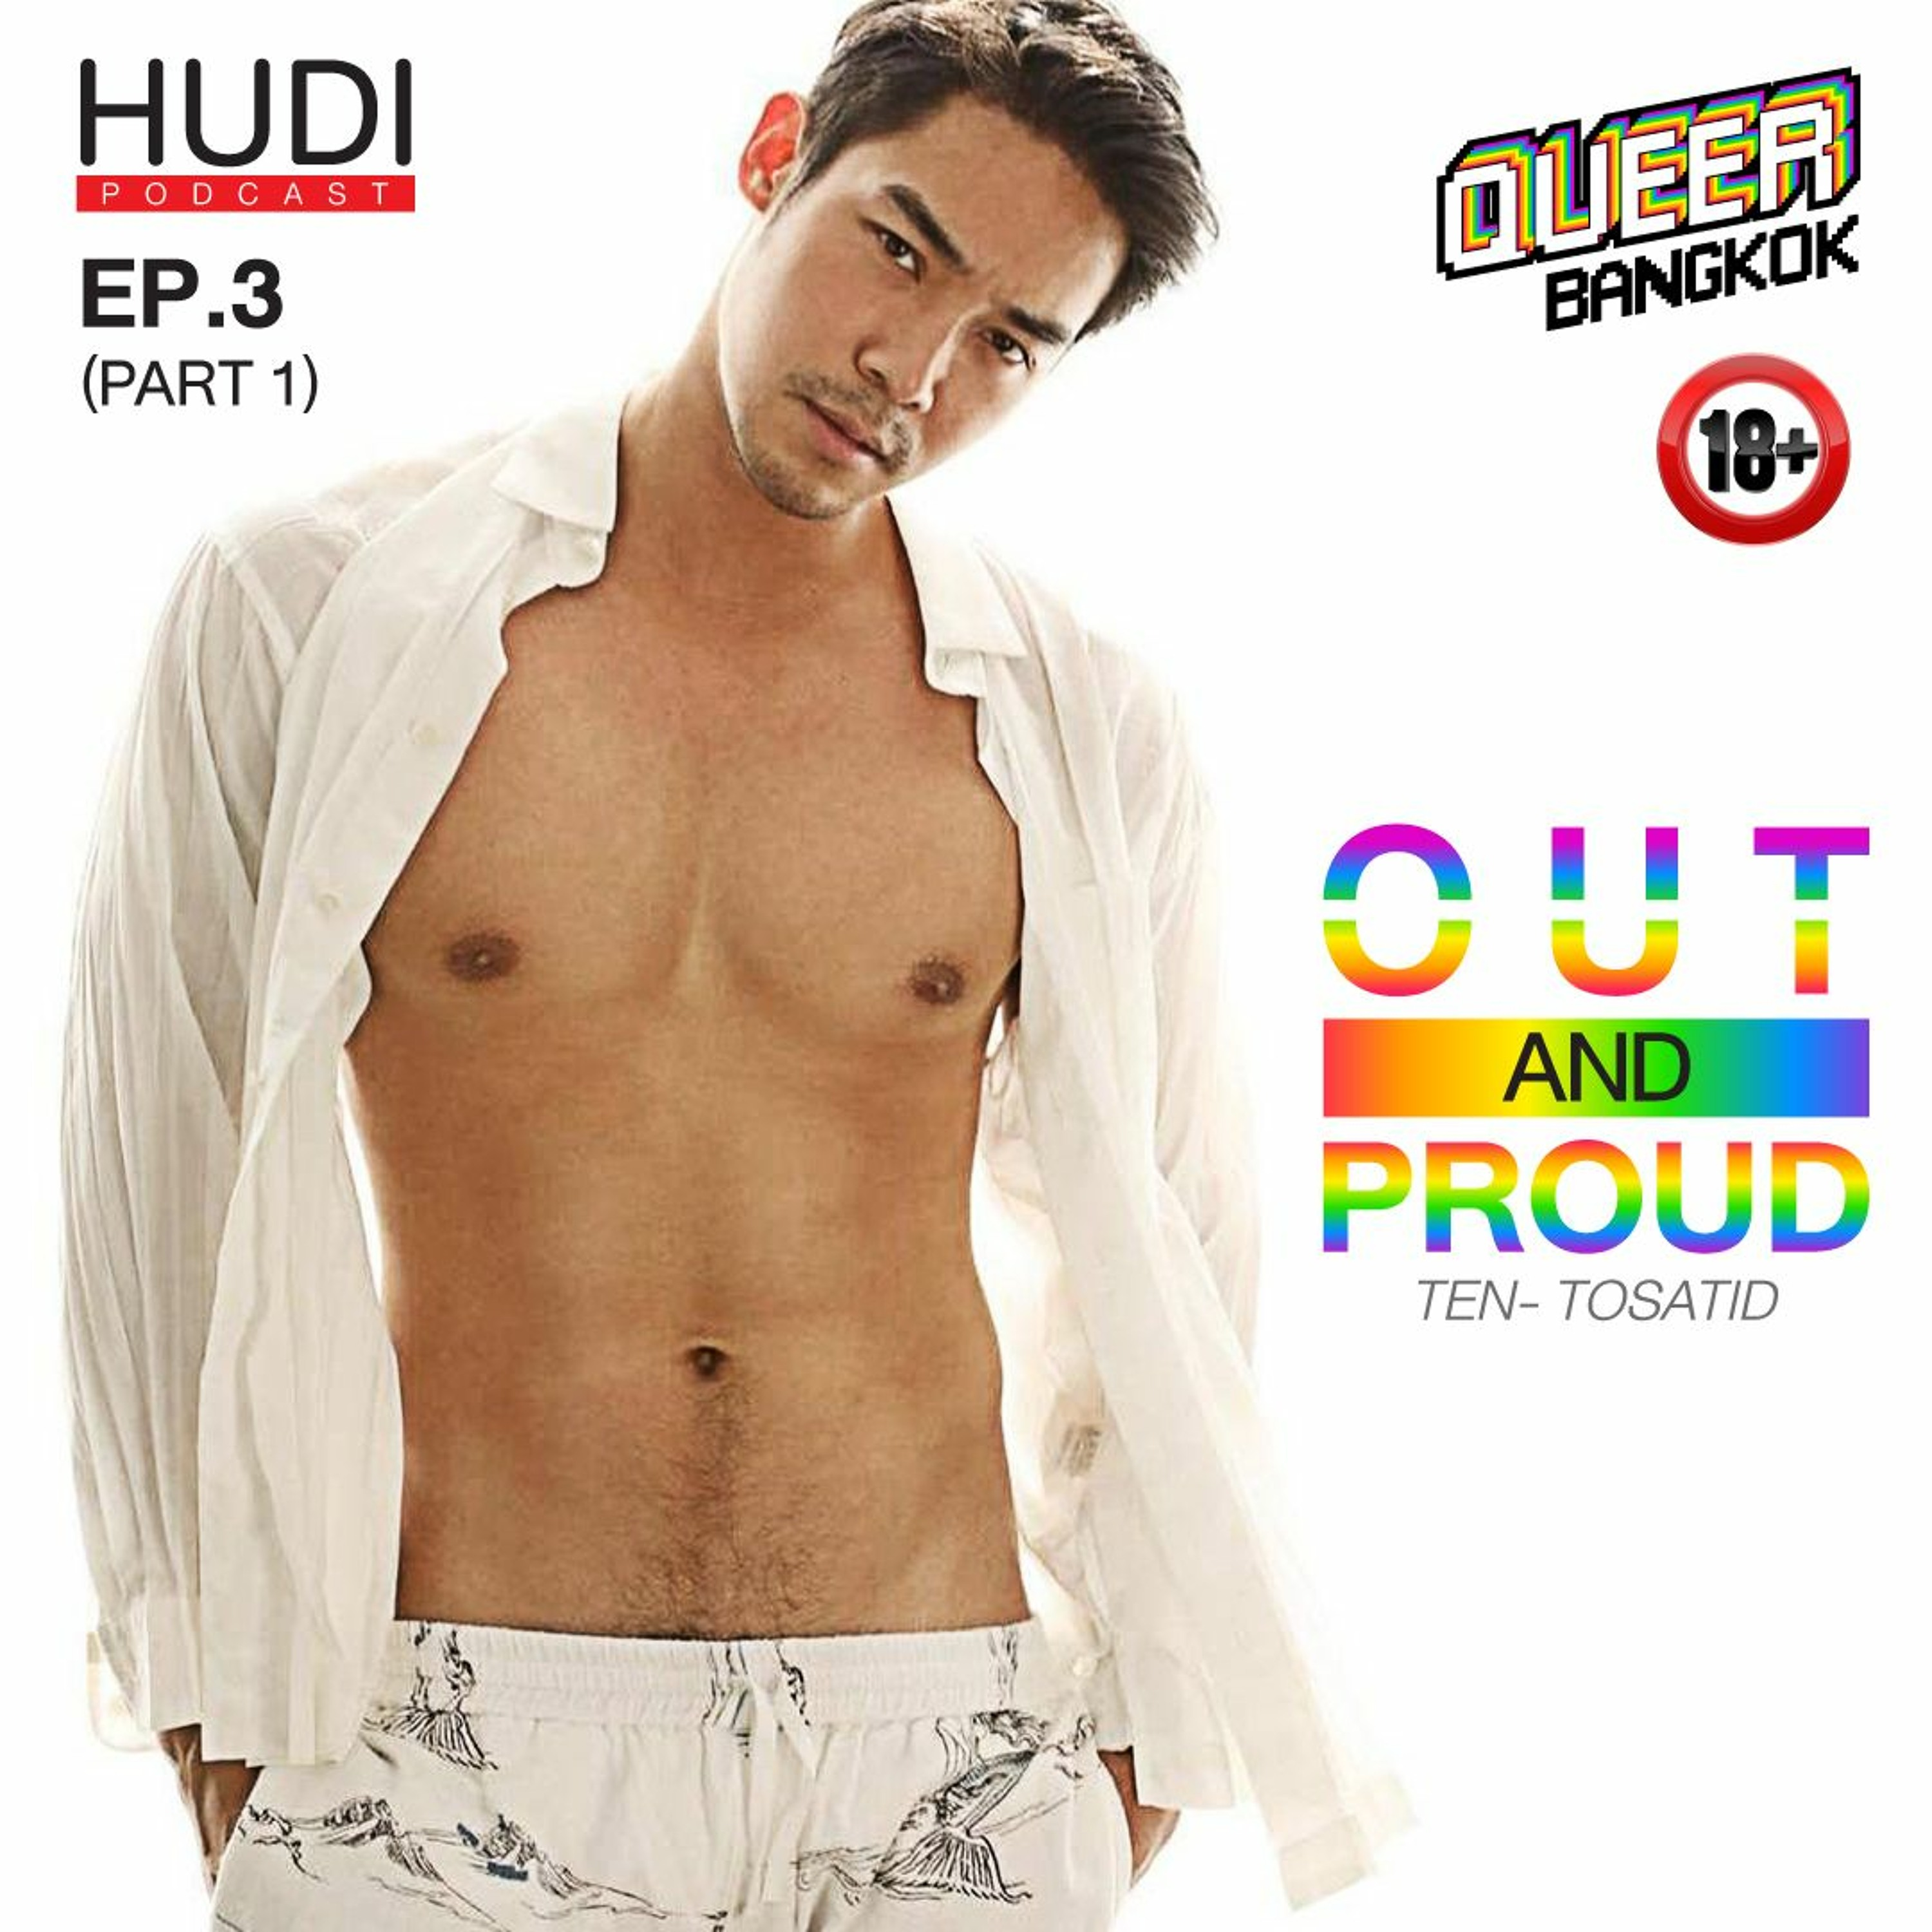 Queer Bangkok Ep.03 - Out and Proud (Part 1)